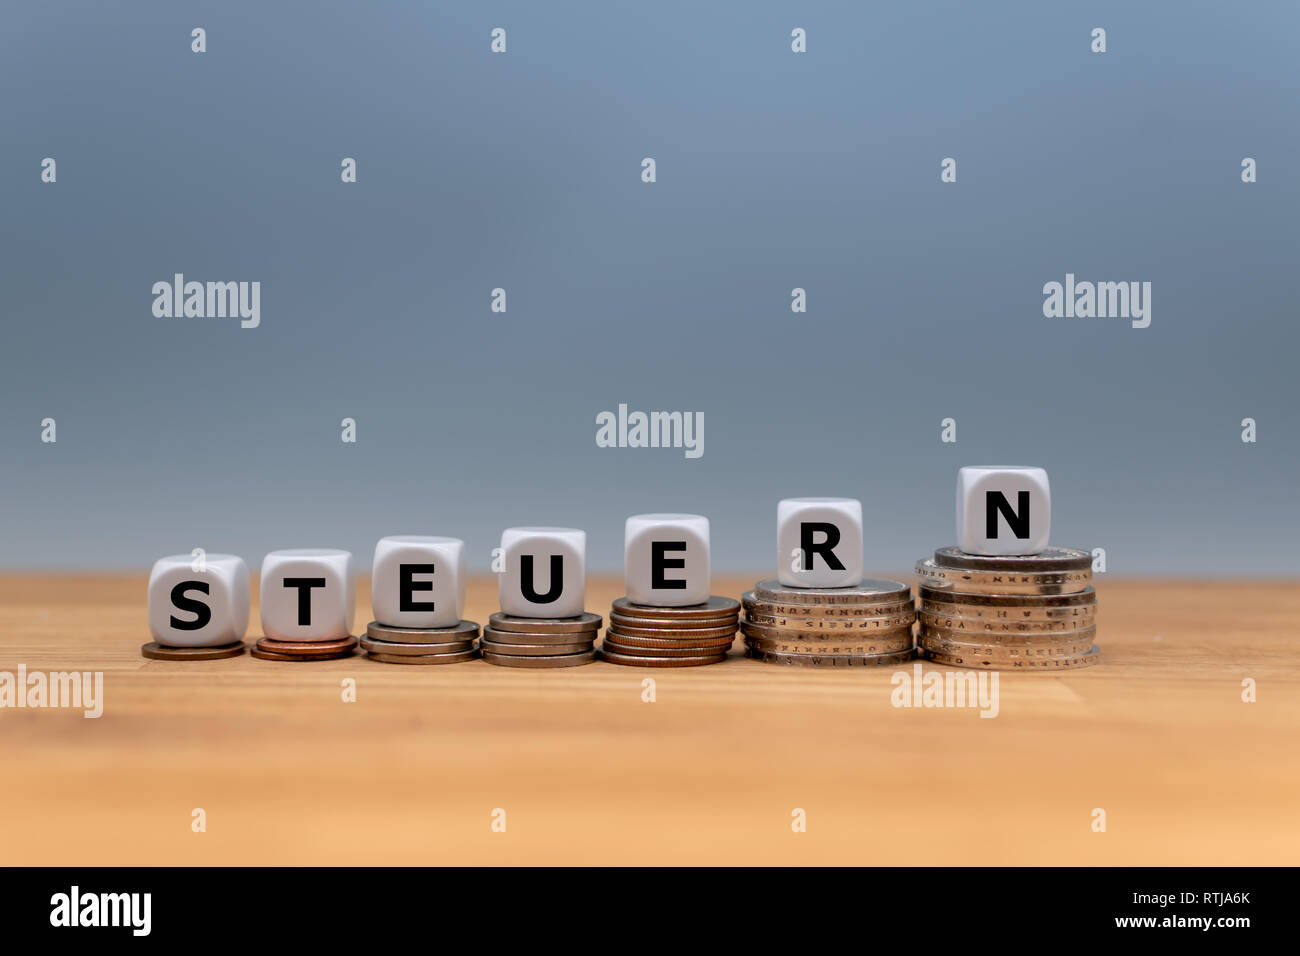 Dice form the German word 'STEUERN' ('TAX' in English) on top of stacks of coins.  Concept of increasing taxes. Stock Photo